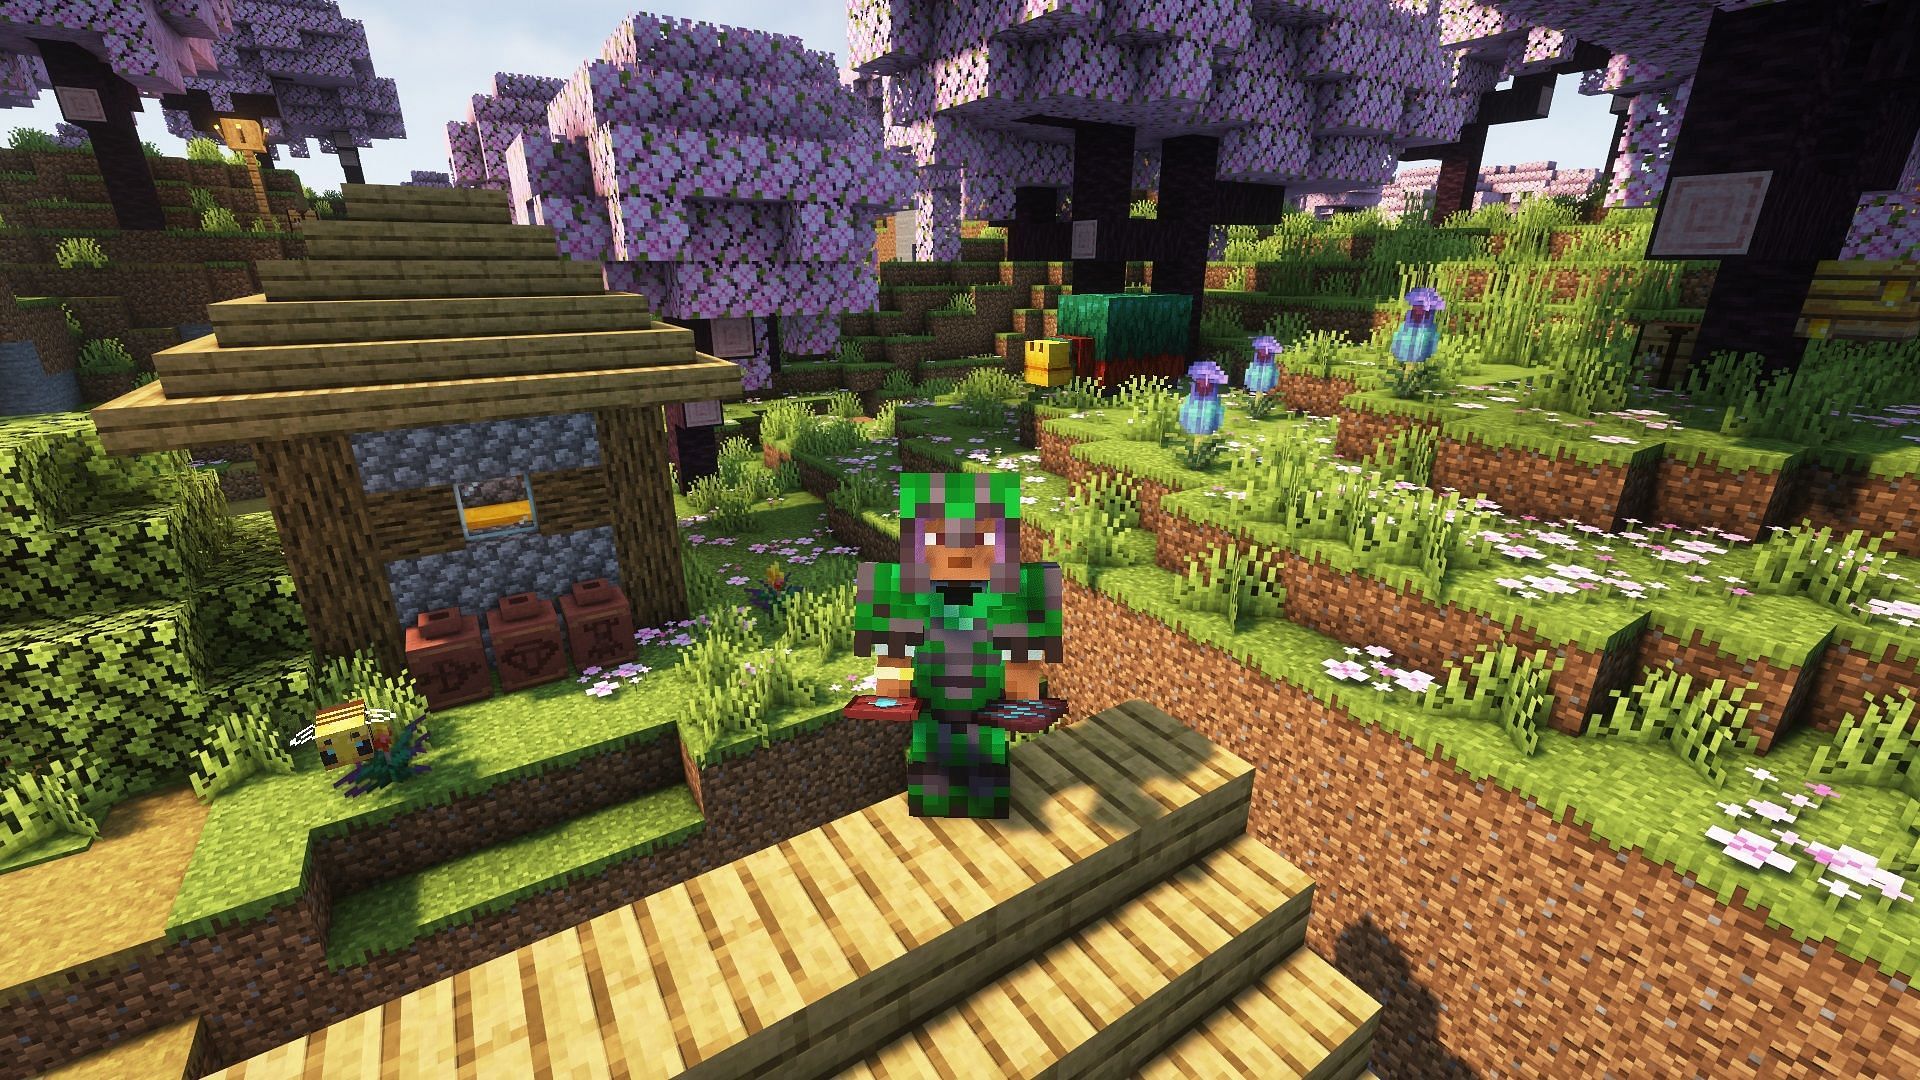 Minecraft 1.20 now has a name: the Trails & Tales Update